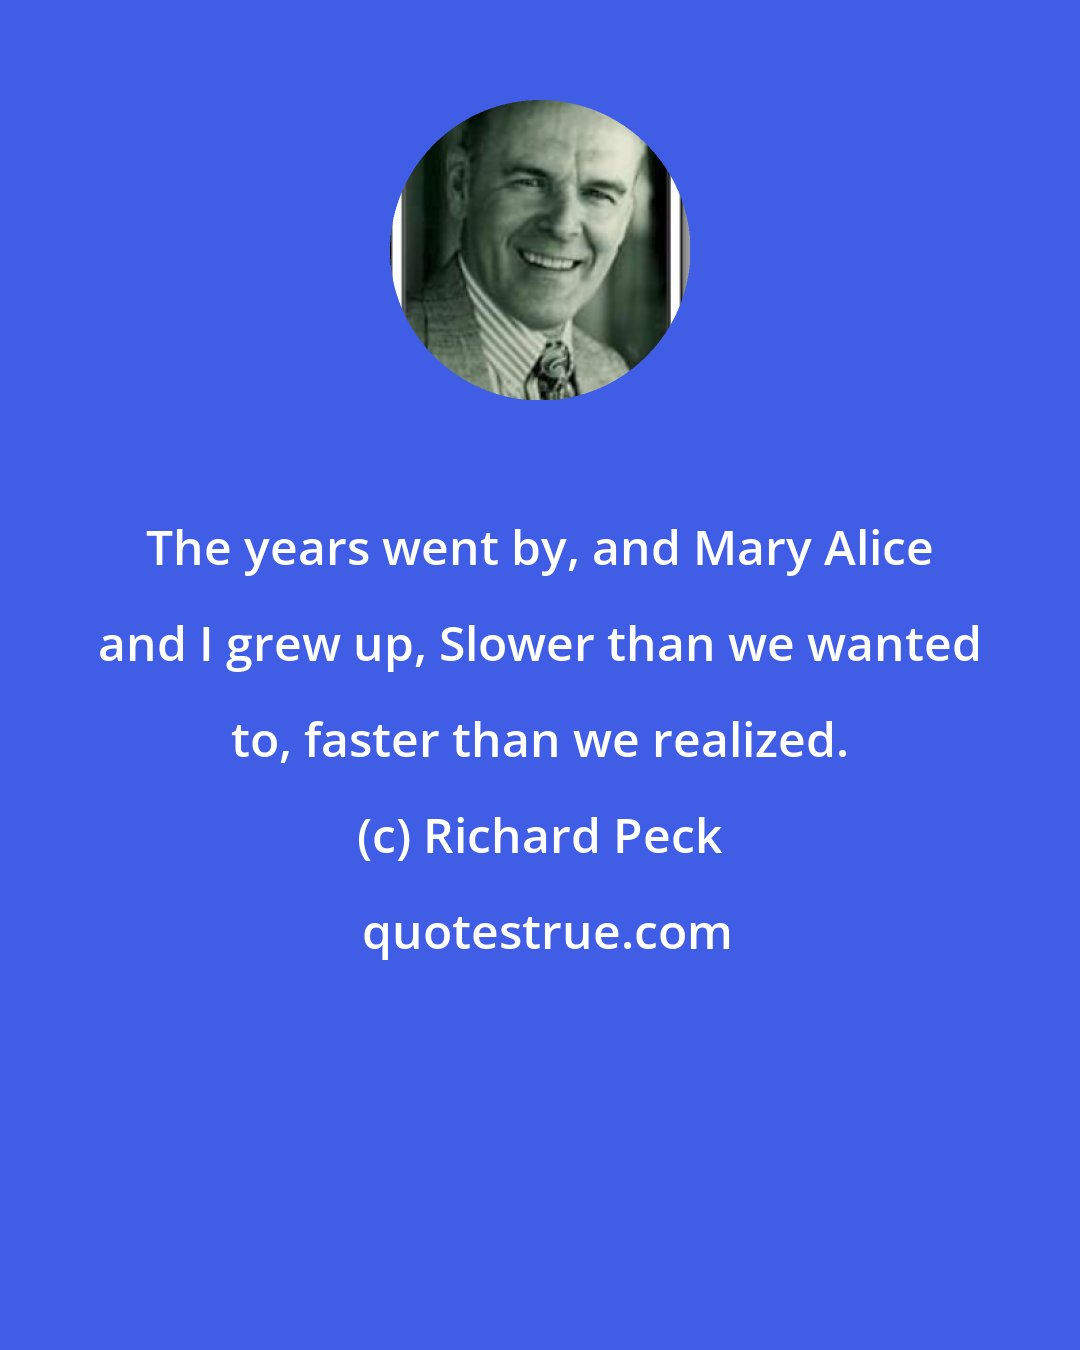 Richard Peck: The years went by, and Mary Alice and I grew up, Slower than we wanted to, faster than we realized.